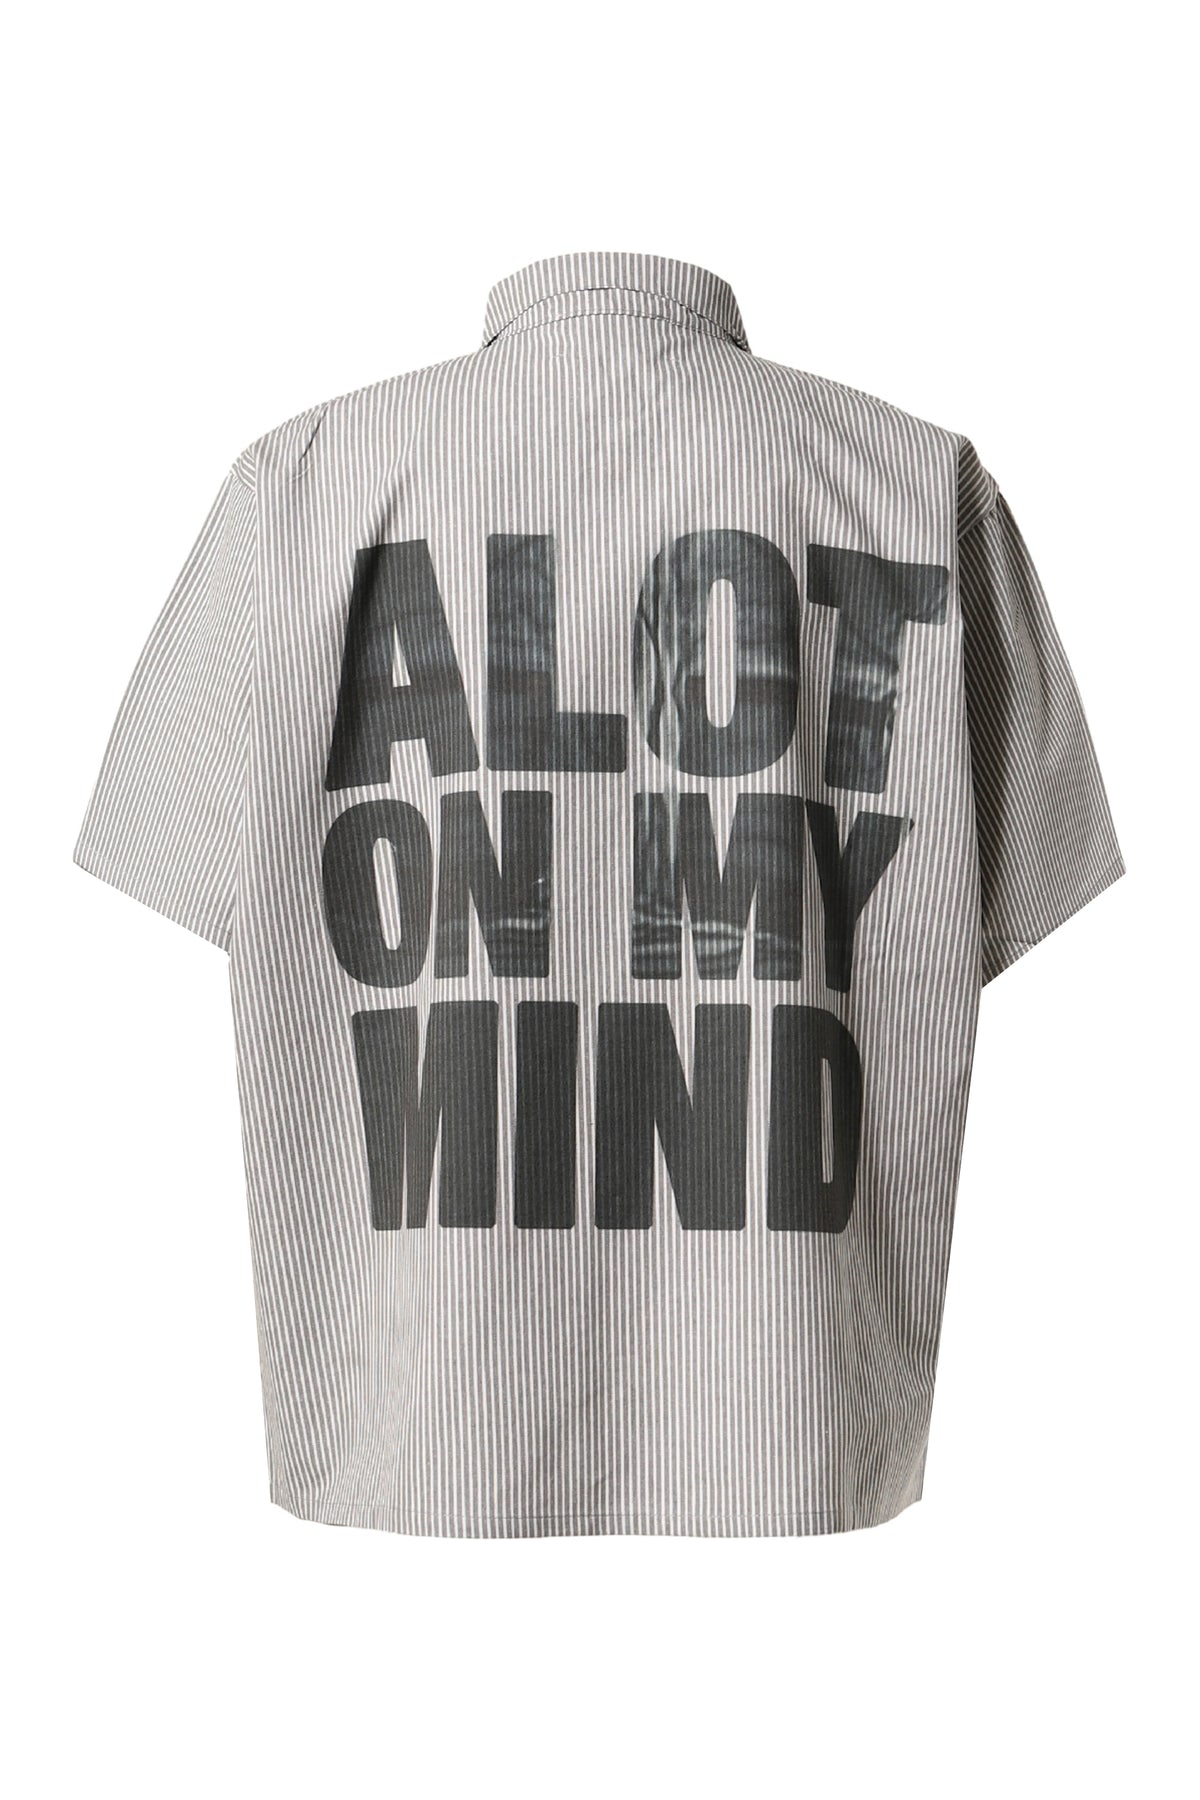 A LOT ON MY MIND OVERSIZED WORKSHIRT / GRY